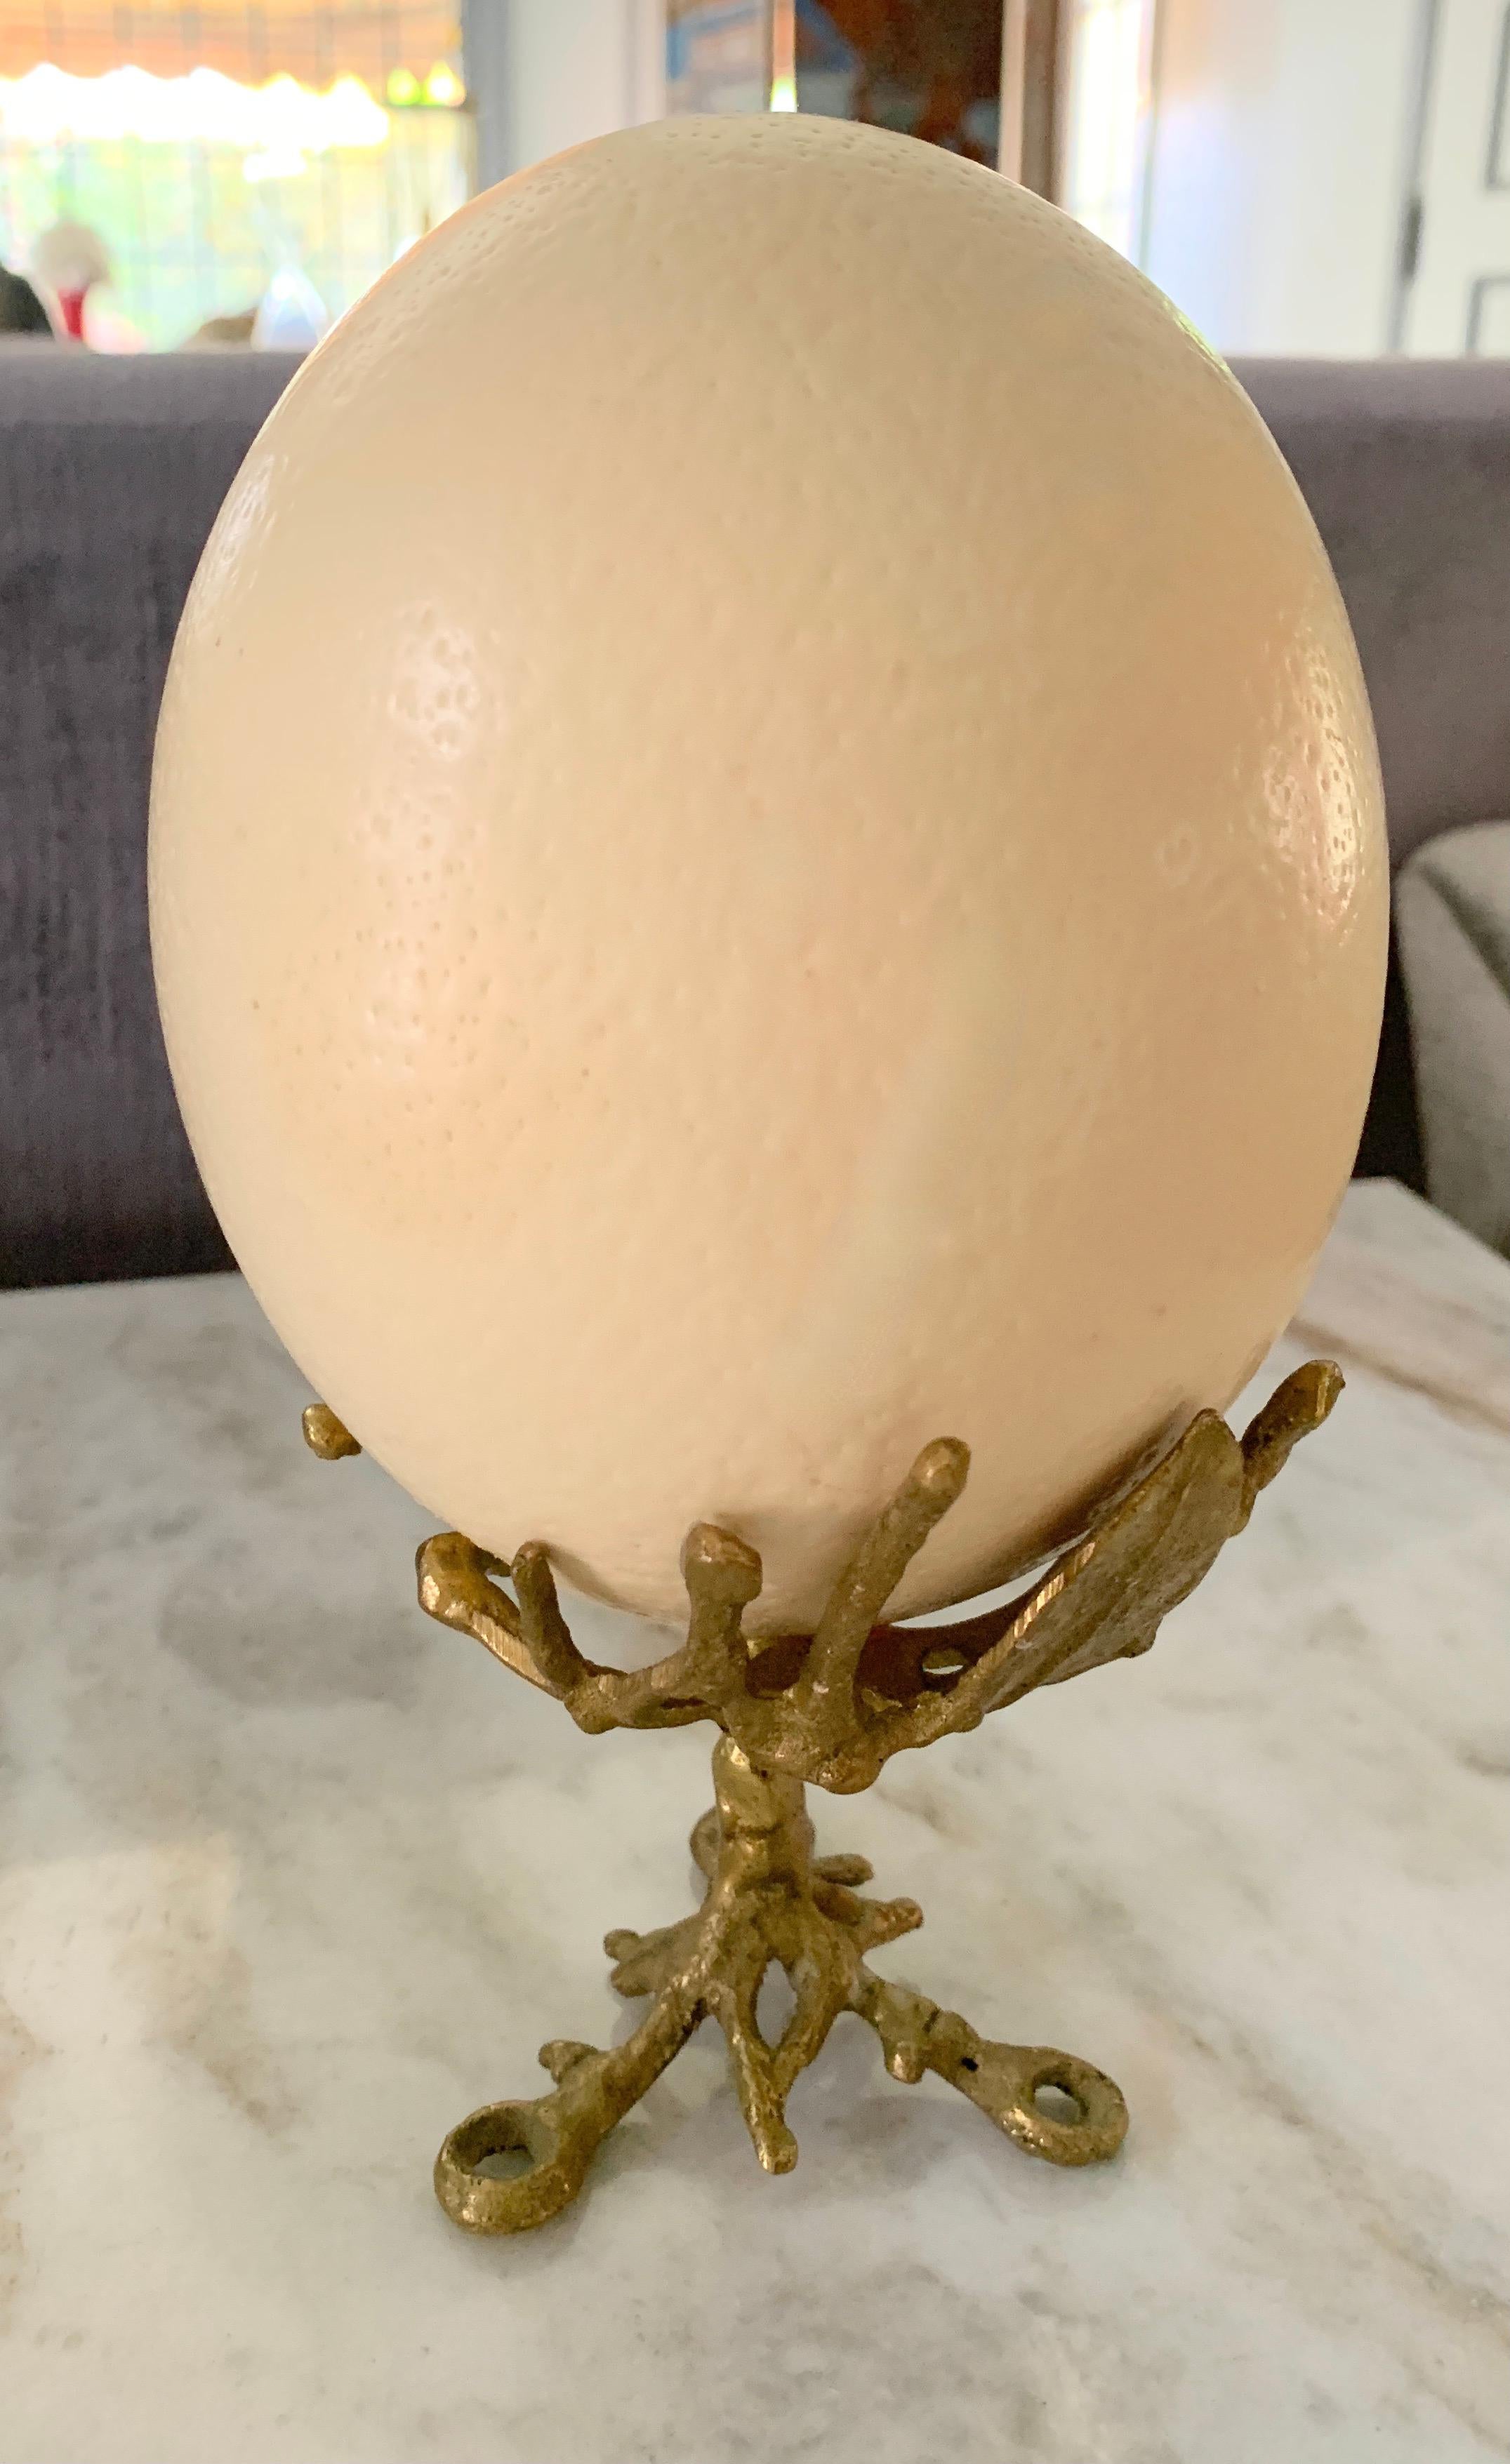 An Ostrich Egg on a gold stand that is twig like, organic and gold. A decorative piece for a shelf or mantle - simplicity and elegance.